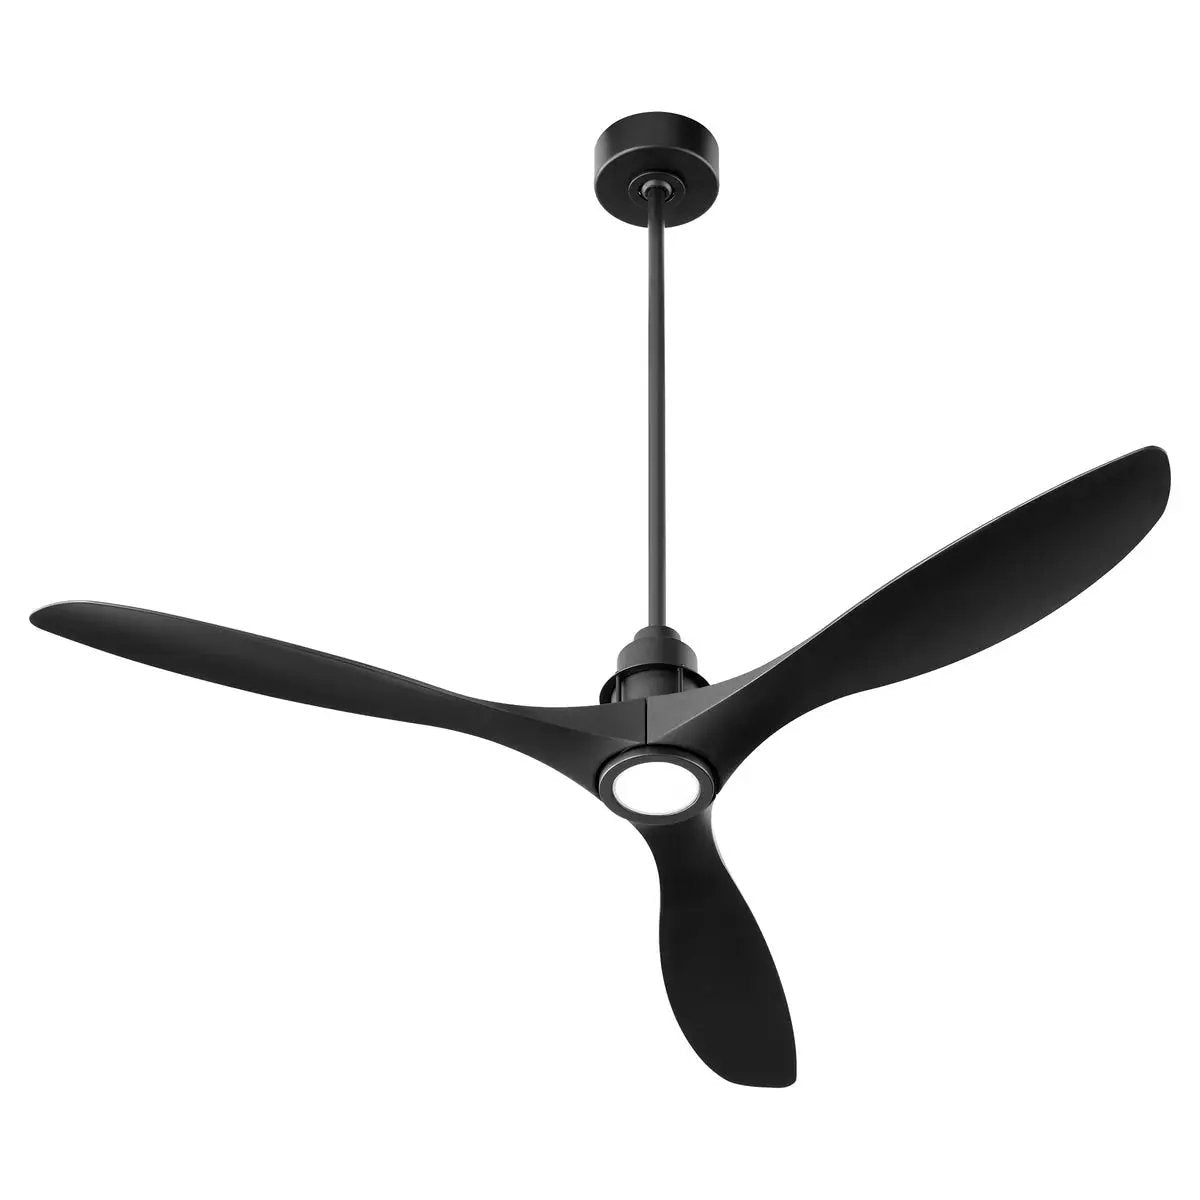 A sleek, modern ceiling fan with a light, featuring a chrome stained housing and three monochromatic blades for powerful air circulation.